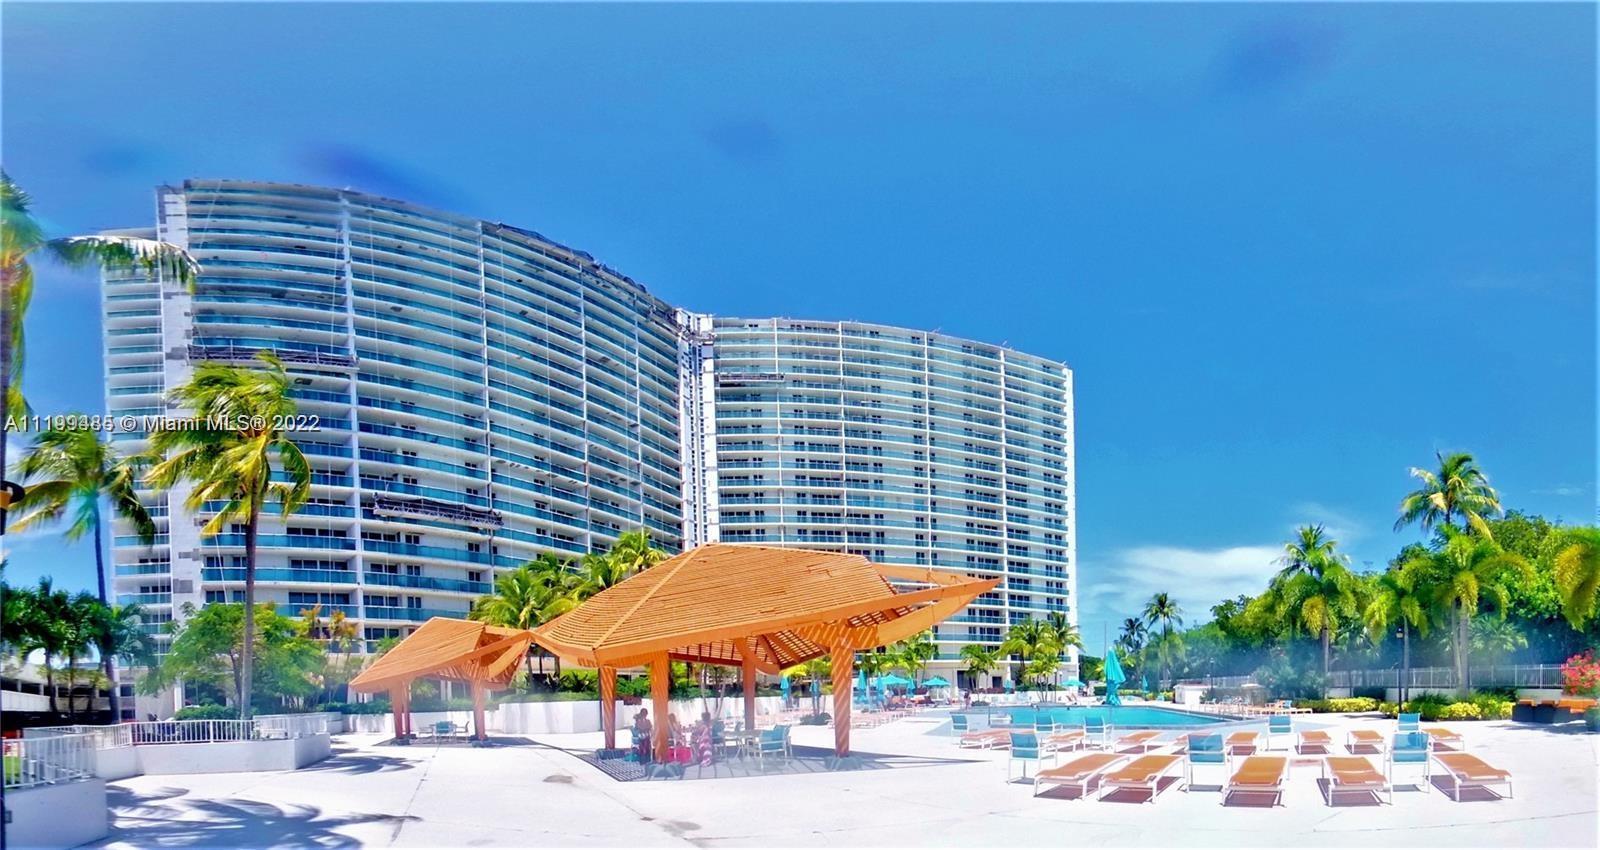 APARTMENT Arlen house building 100! Large 2 bedrooms 2 baths in Sunny Isles with a beautiful view! D